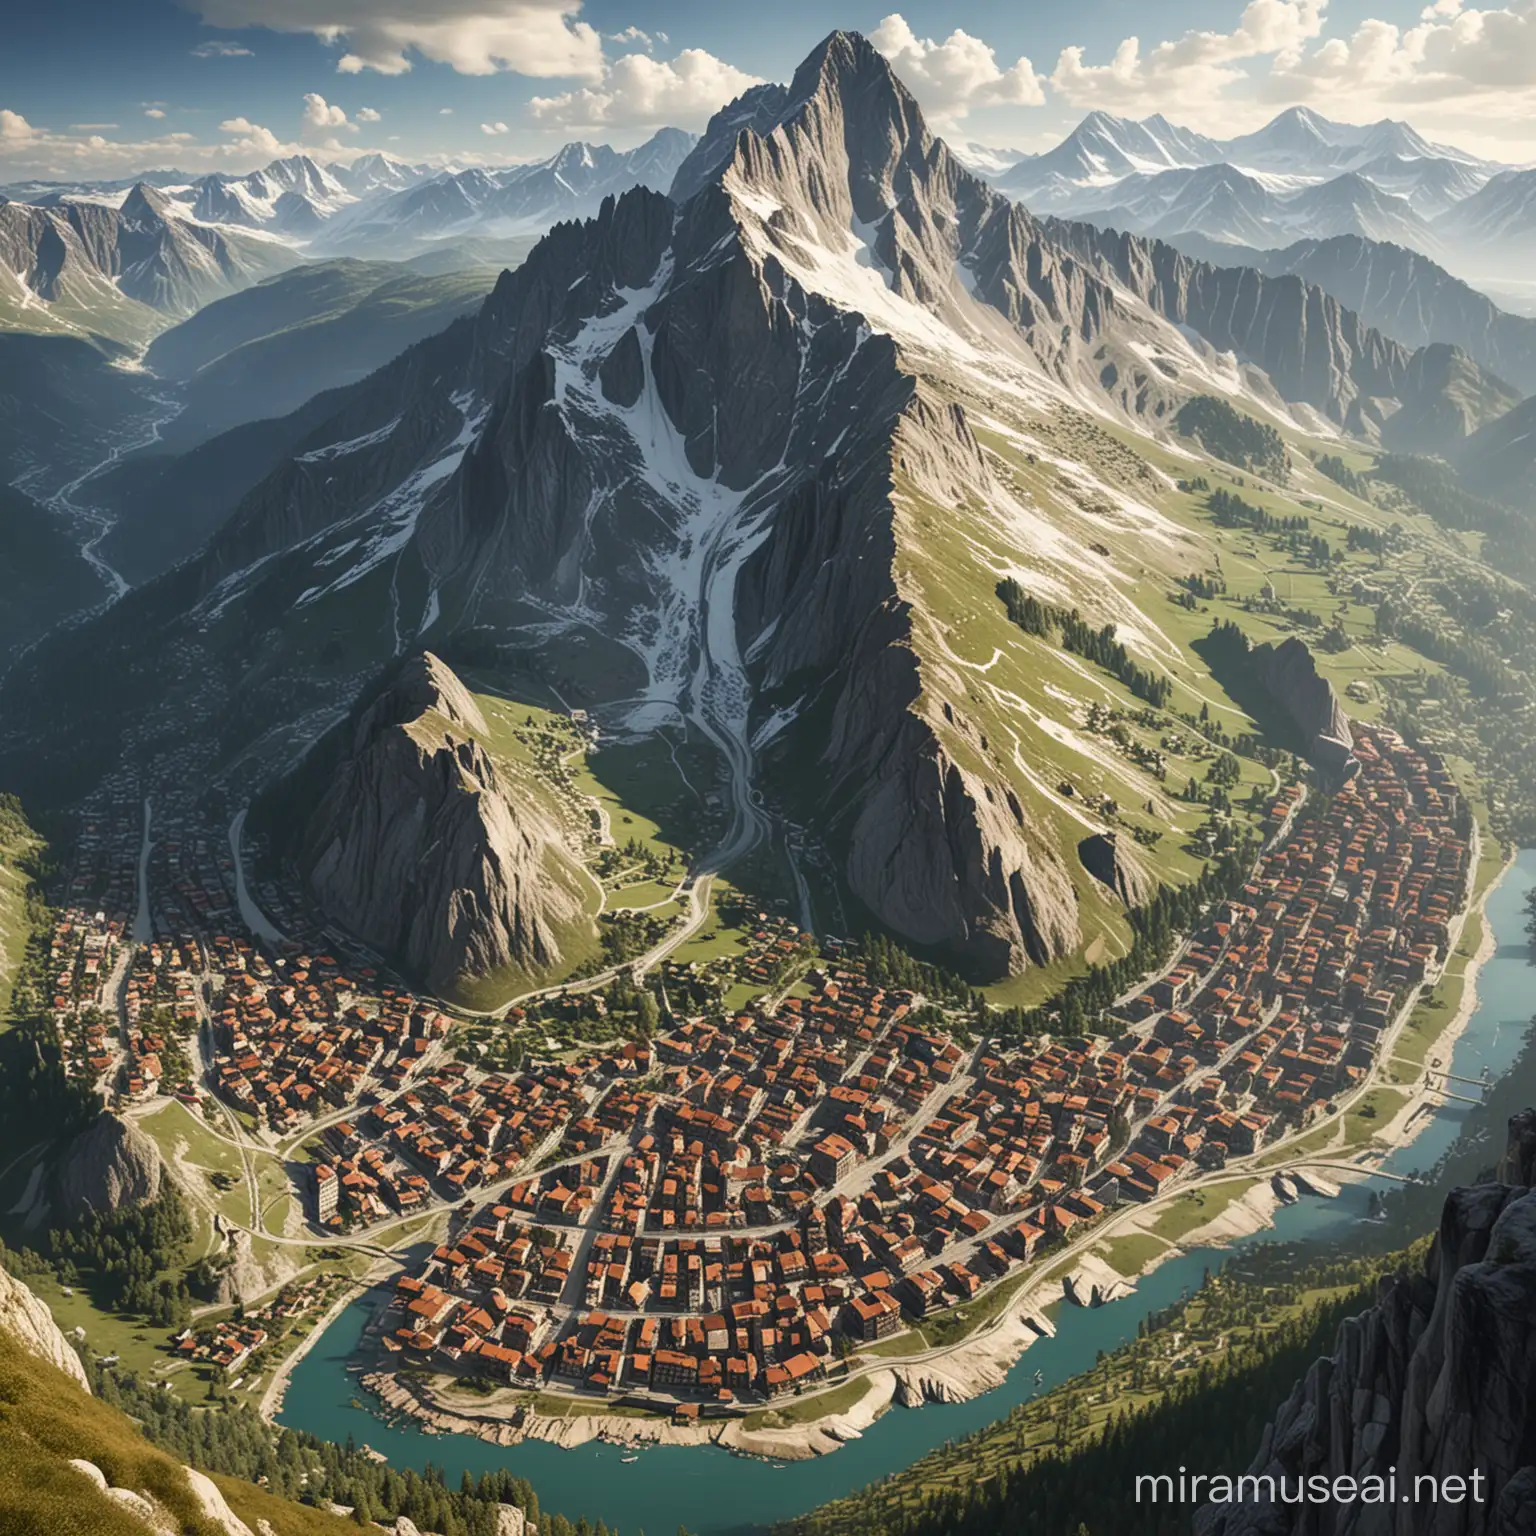 city in mountain map

